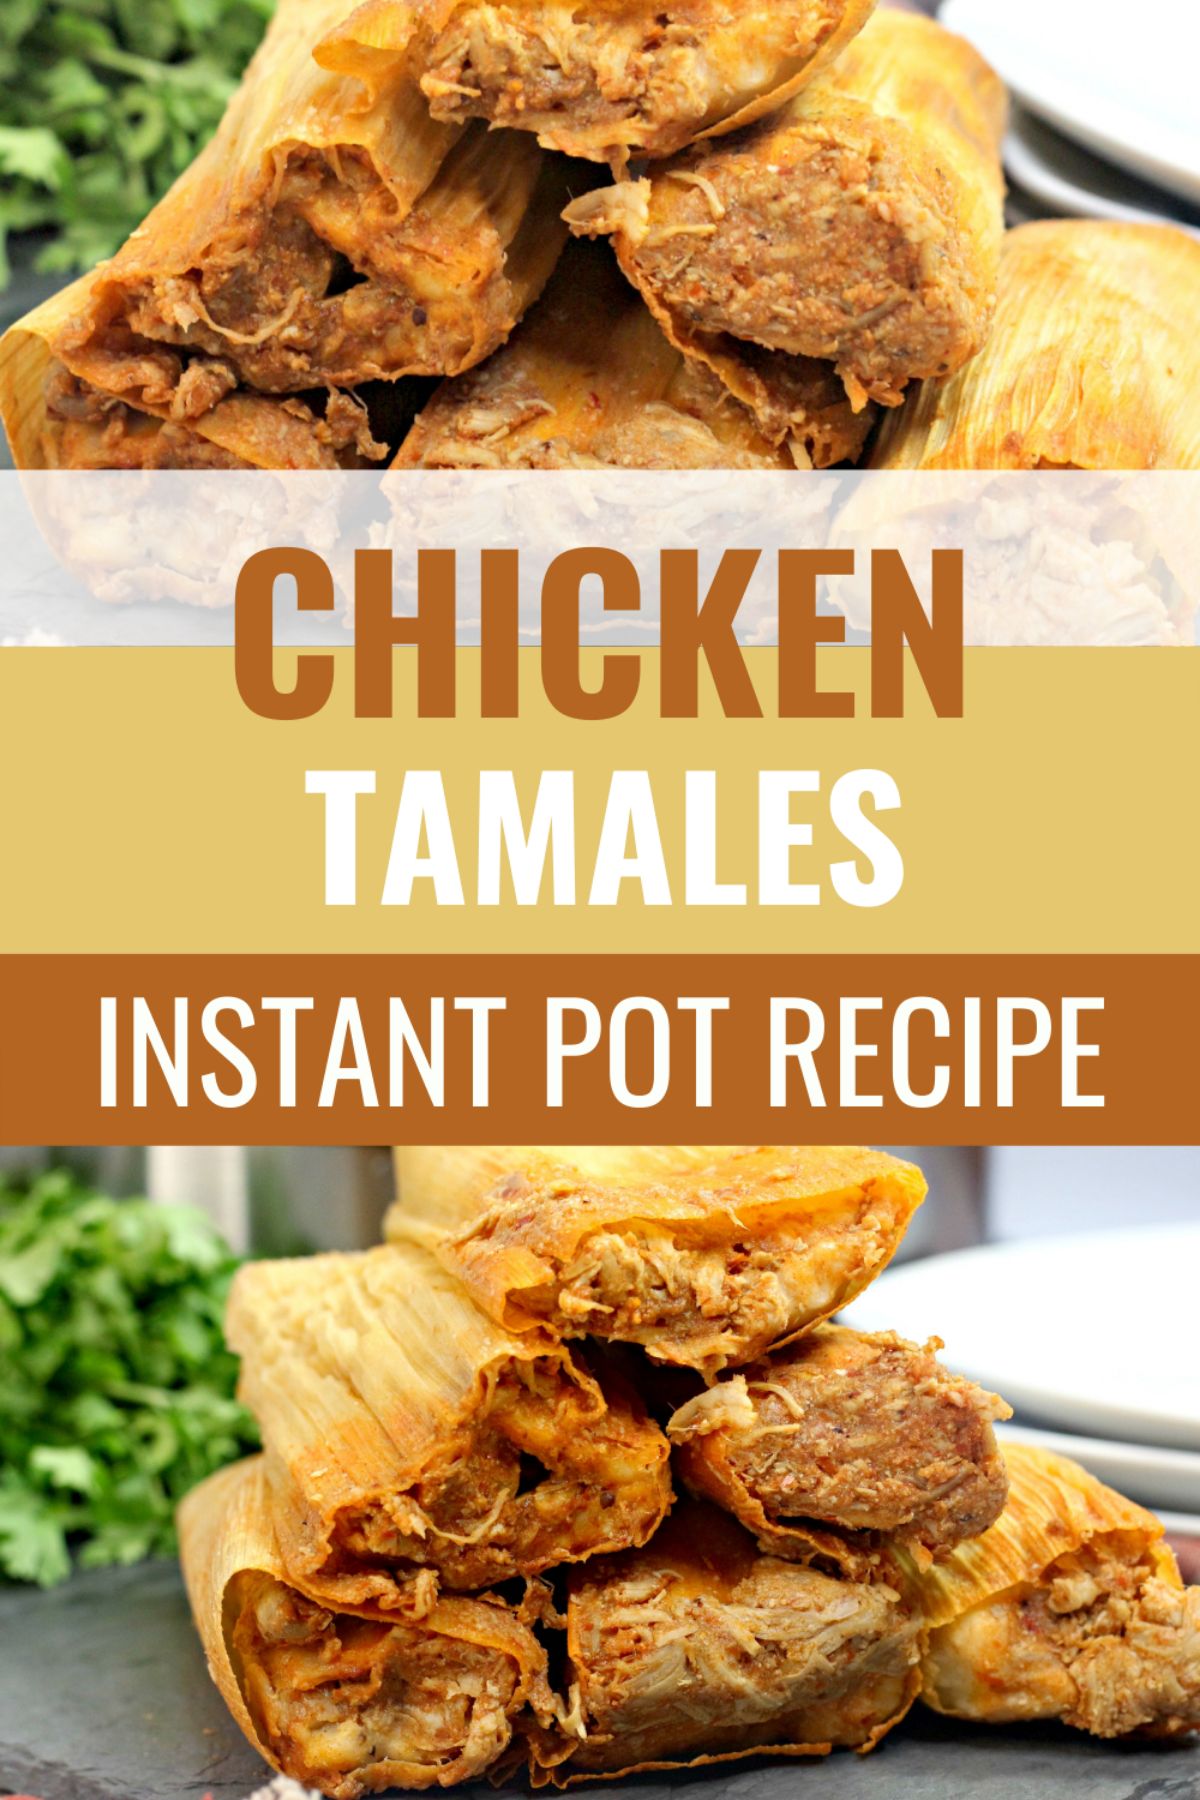 Instant Pot Tamales are a delicious Mexican dish for a great weeknight meal. The flavor of the spices and chicken is a crowd-pleaser. #instantpot #pressurecooker #tamales #instantpottamales #mexicanfood via @wondermomwannab